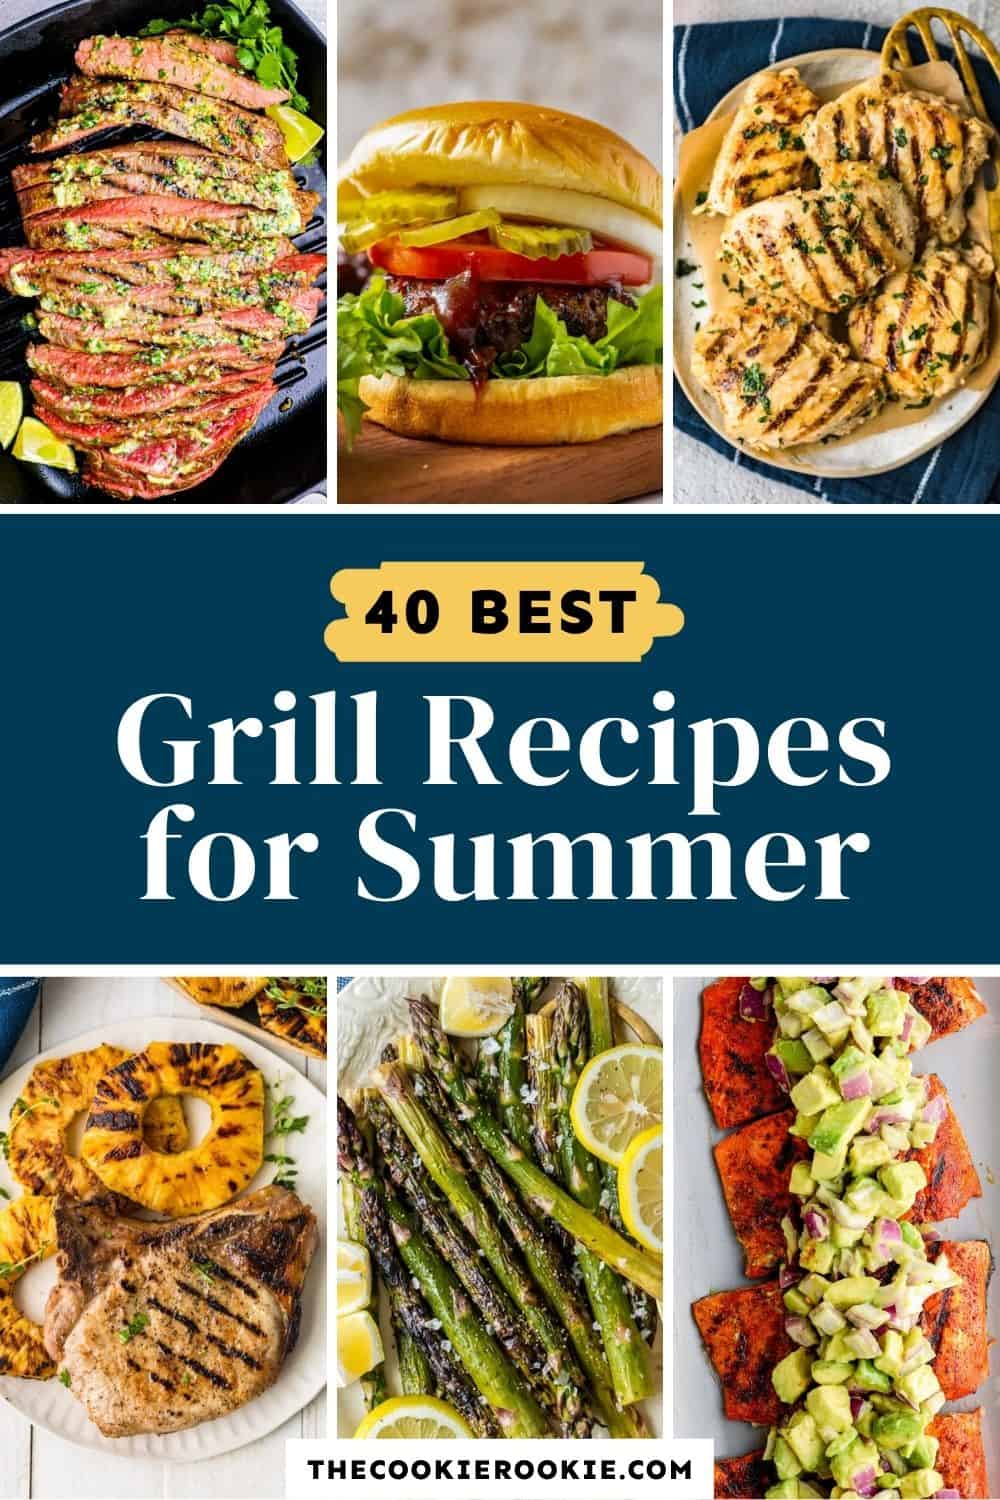 I. Introduction to creating a grilling menu